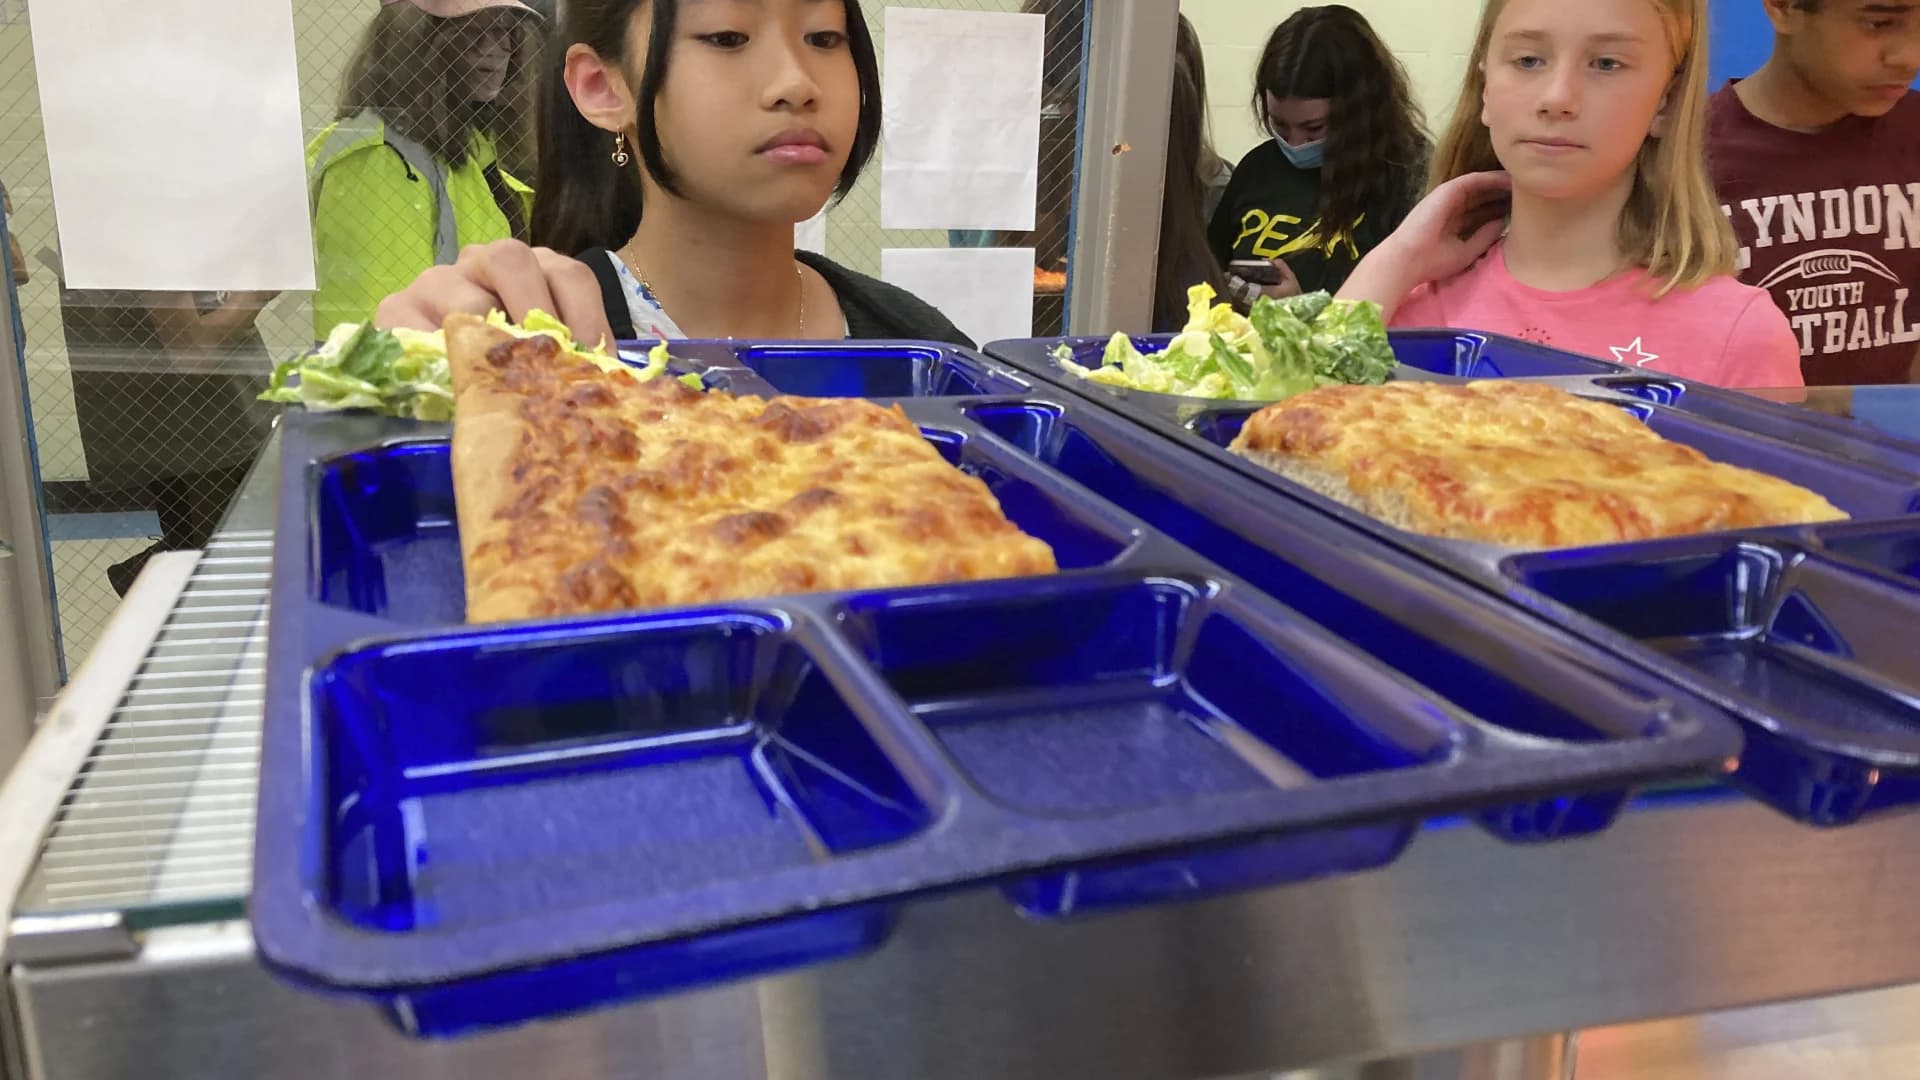 Guide: Free school meals are ending in the 2022-2023 school year. Here's how you can get help.